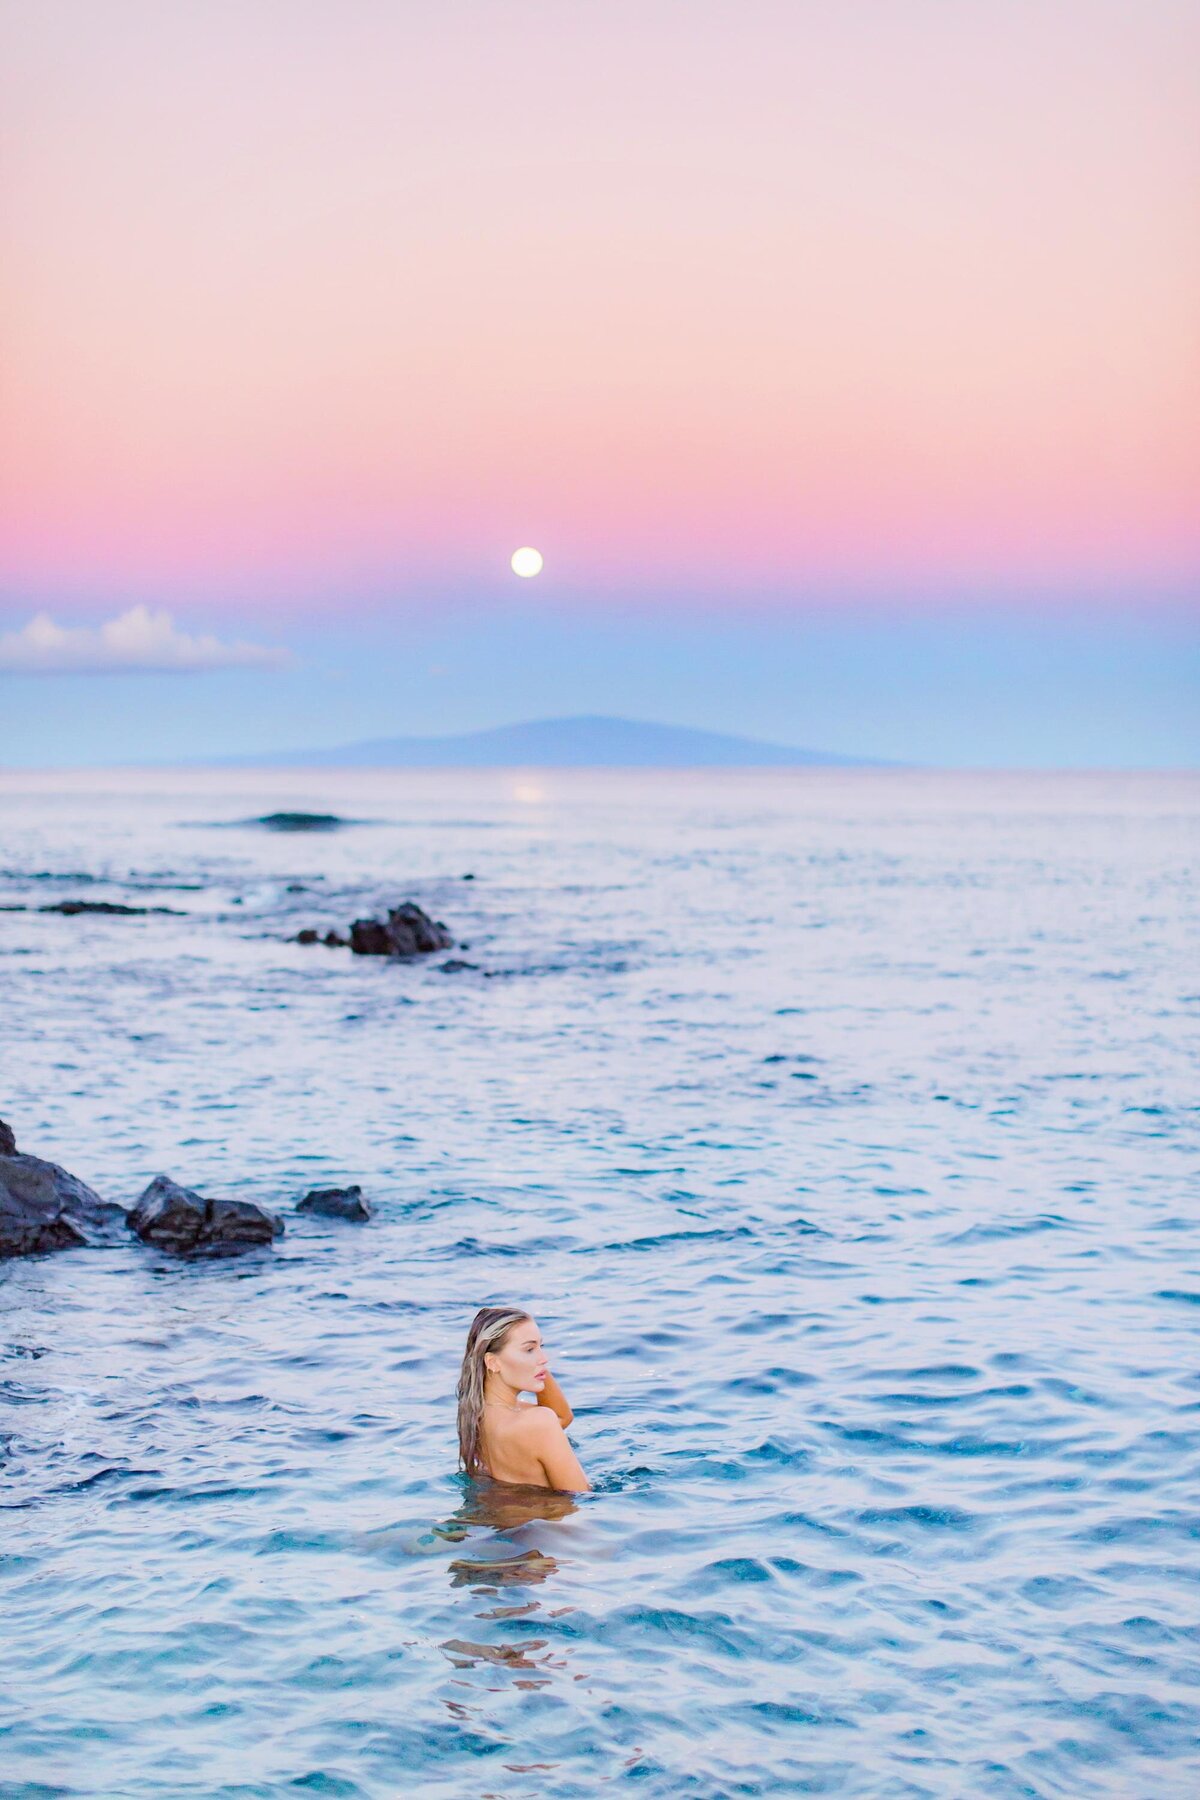 Blonde woman stands in the water and stares out at the ocean under a pastel sky